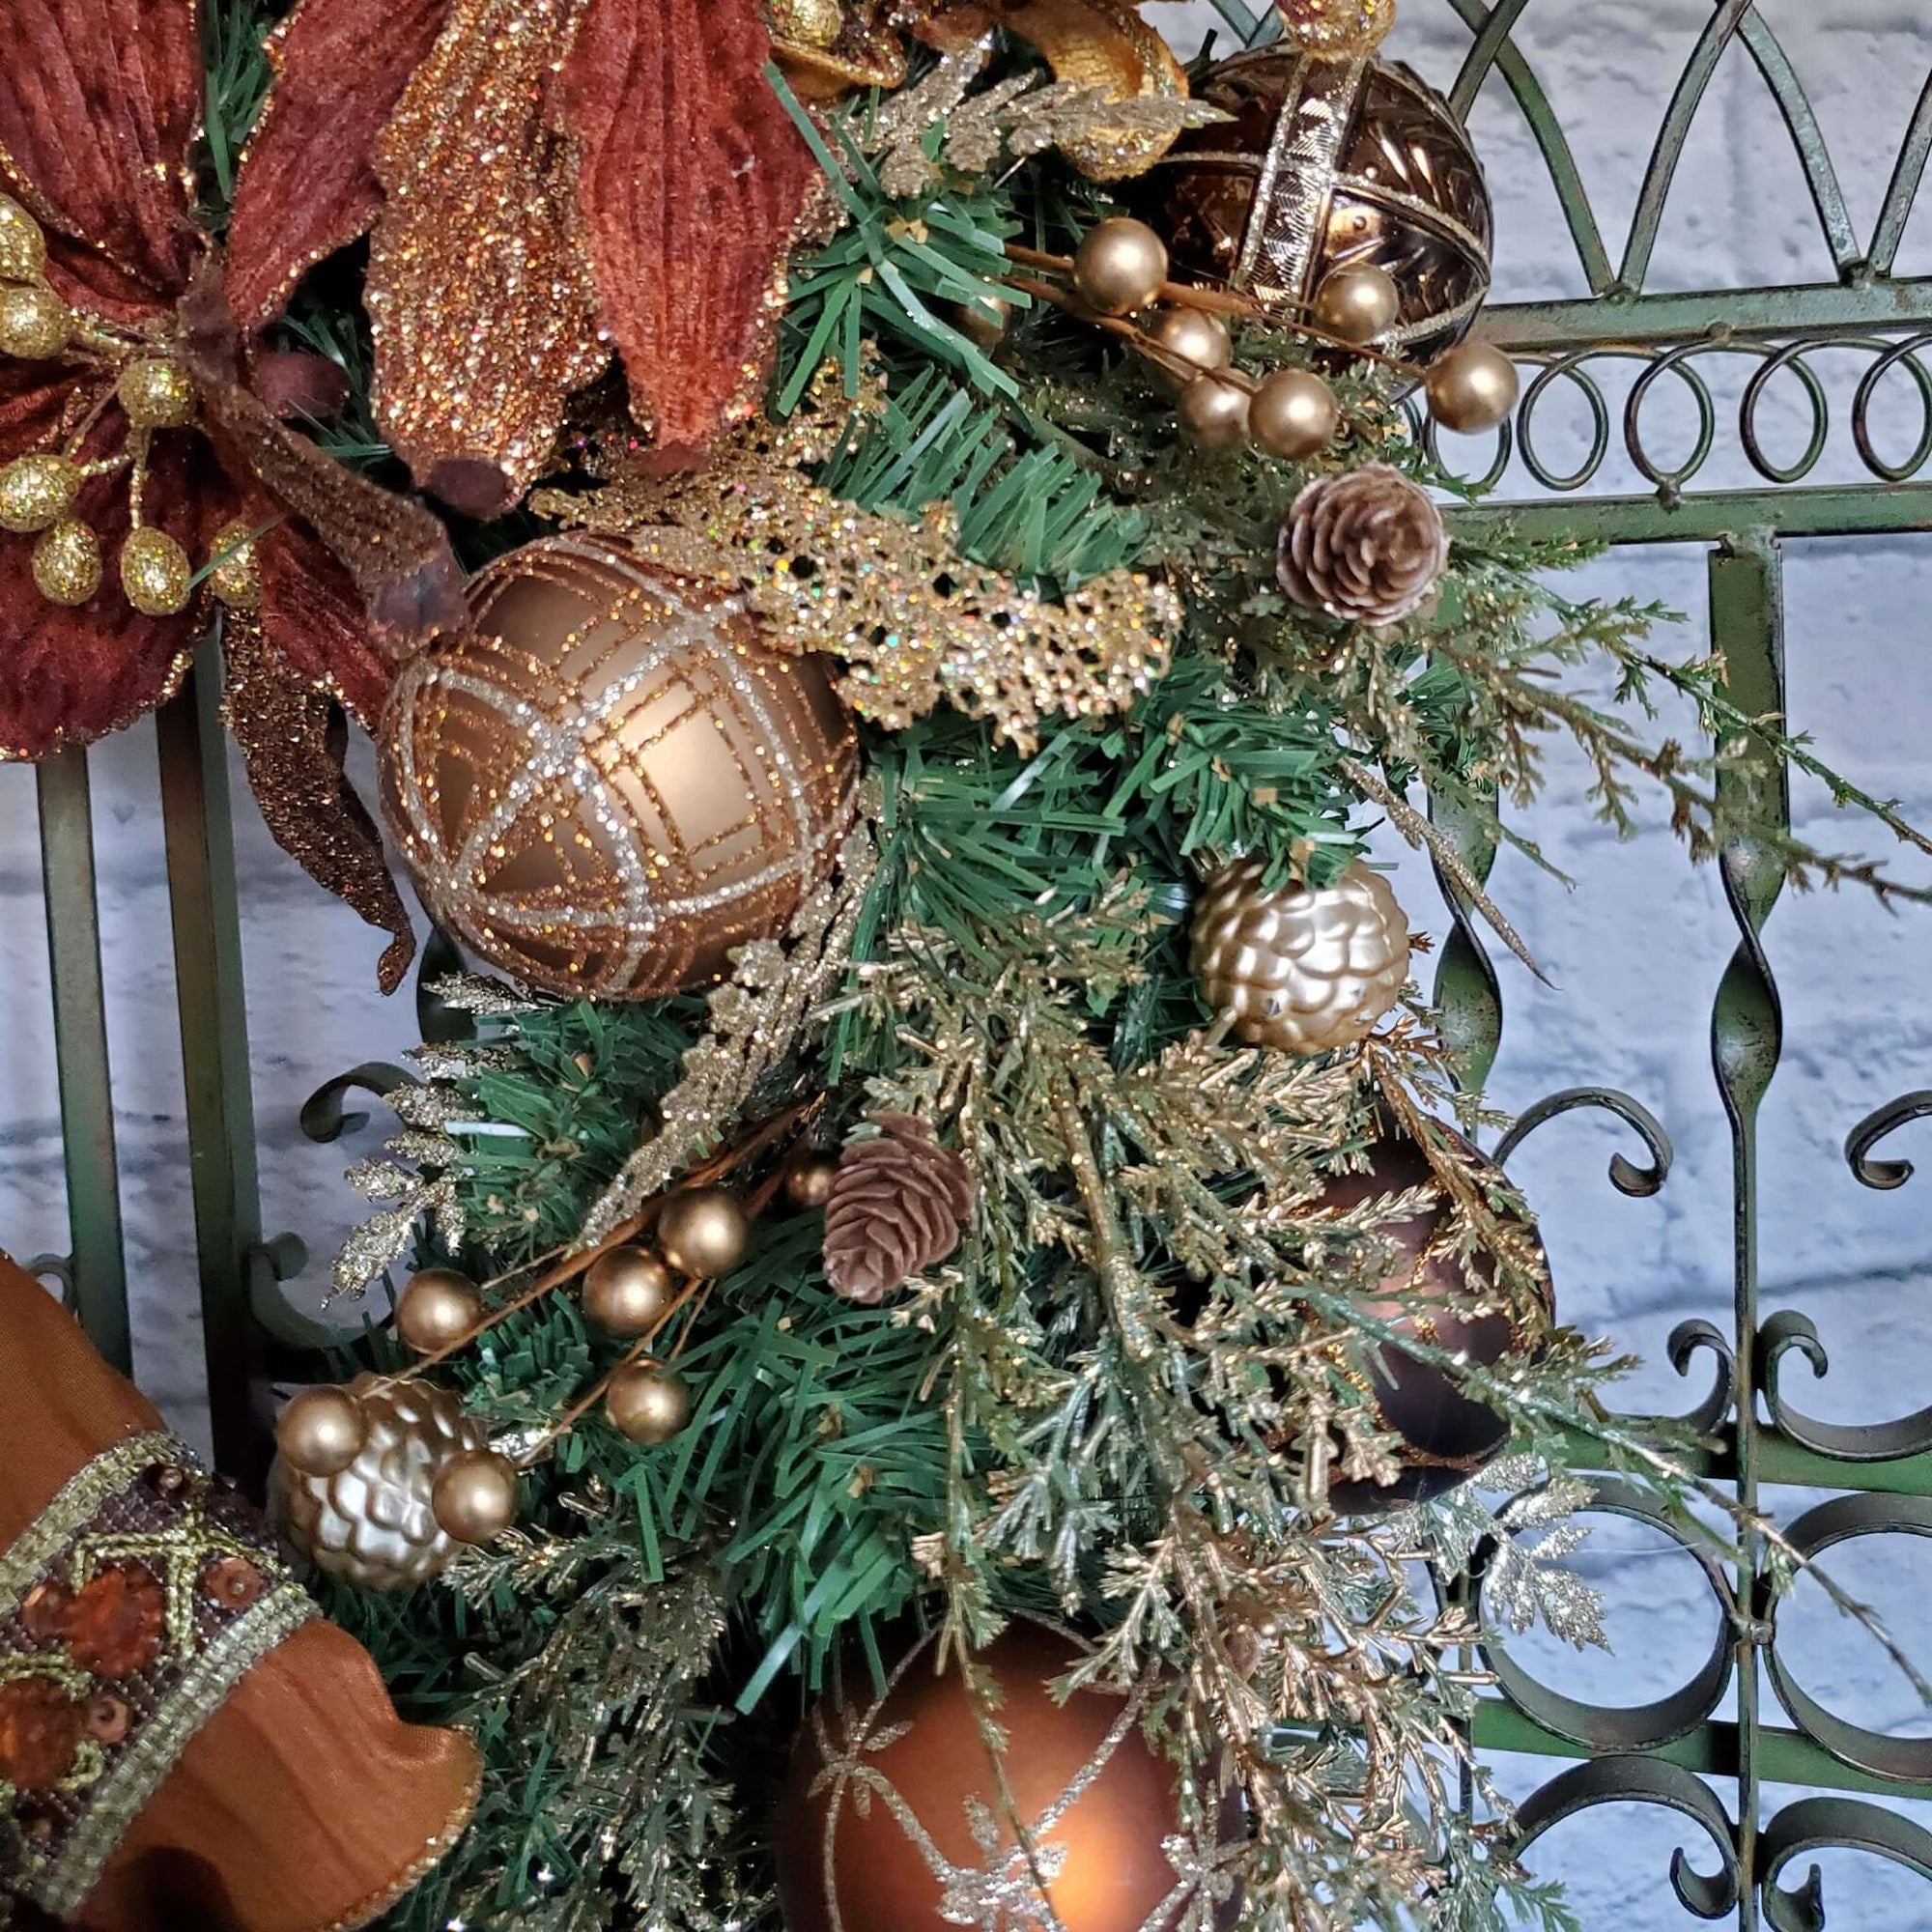 Round, one inch gold pinecone ornaments are scattered throughout the wreath.